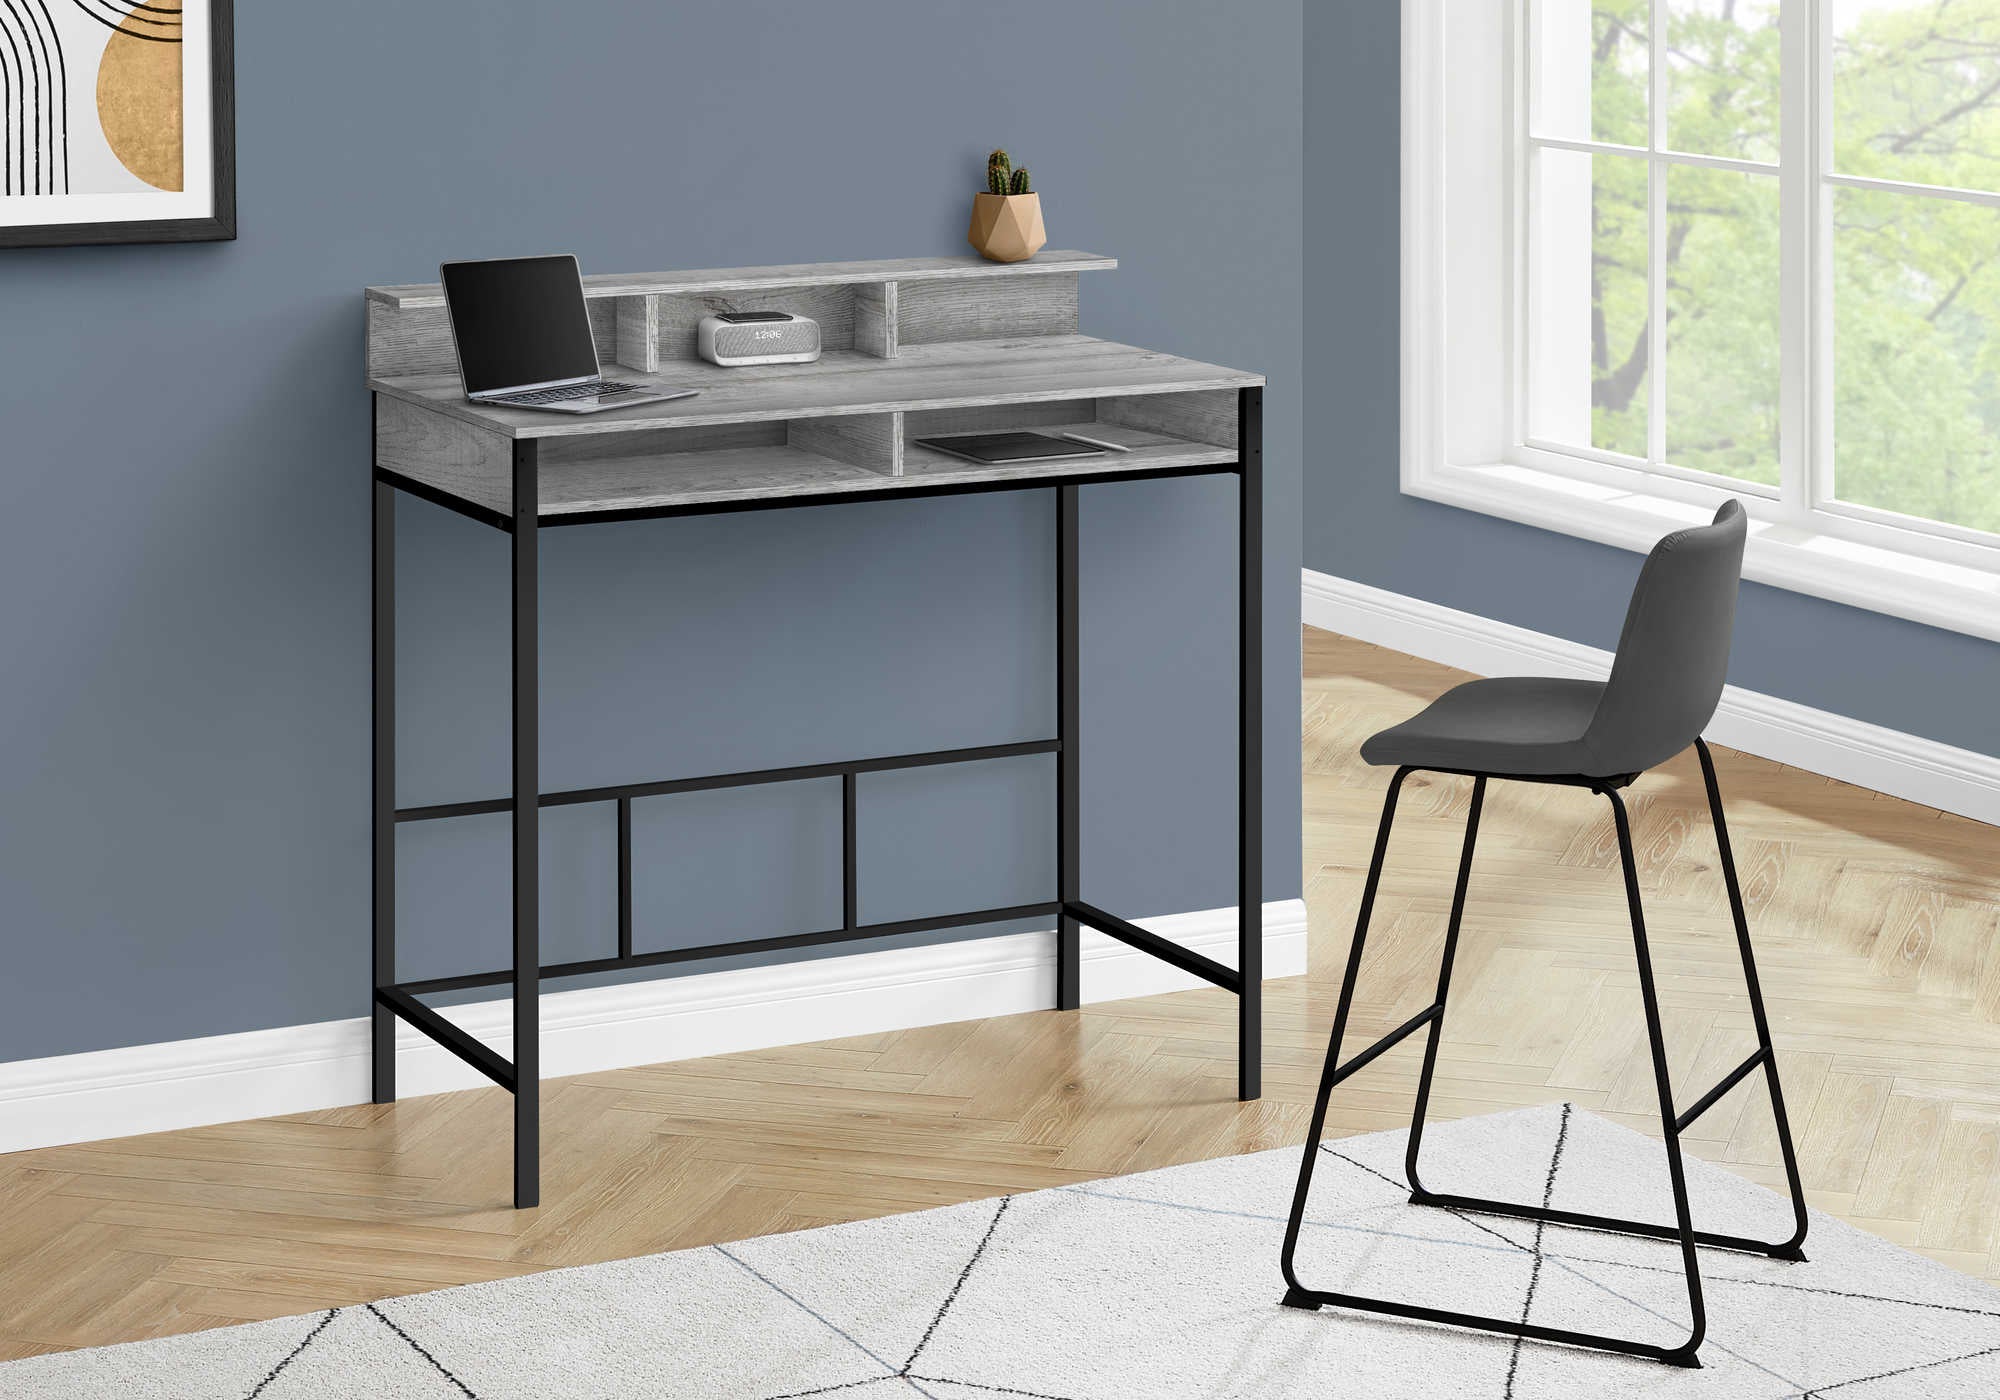 I 7703 - COMPUTER DESK ONLY - 48"L / GREY / BLACK STANDING HEIGHT BY MONARCH SPECIALTIES INC